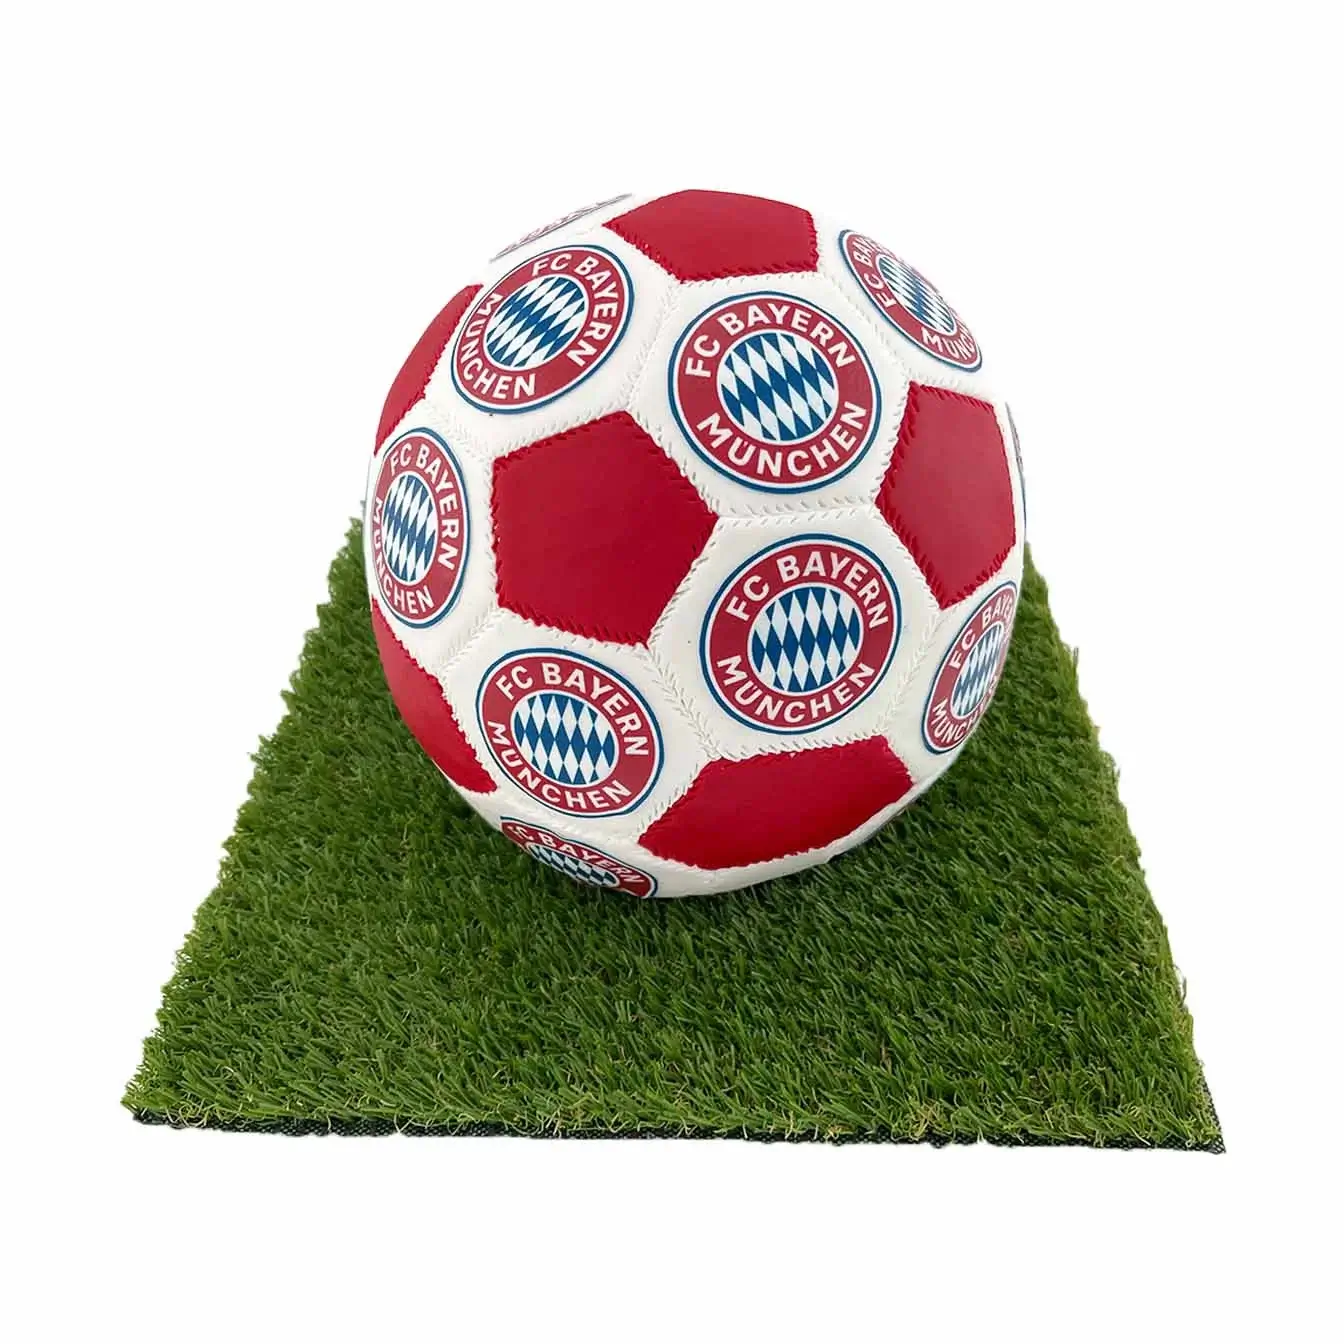 3D Soccer Ball Spectacular Cake - A lifelike soccer ball-shaped cake, a perfect centerpiece for soccer-themed celebrations.